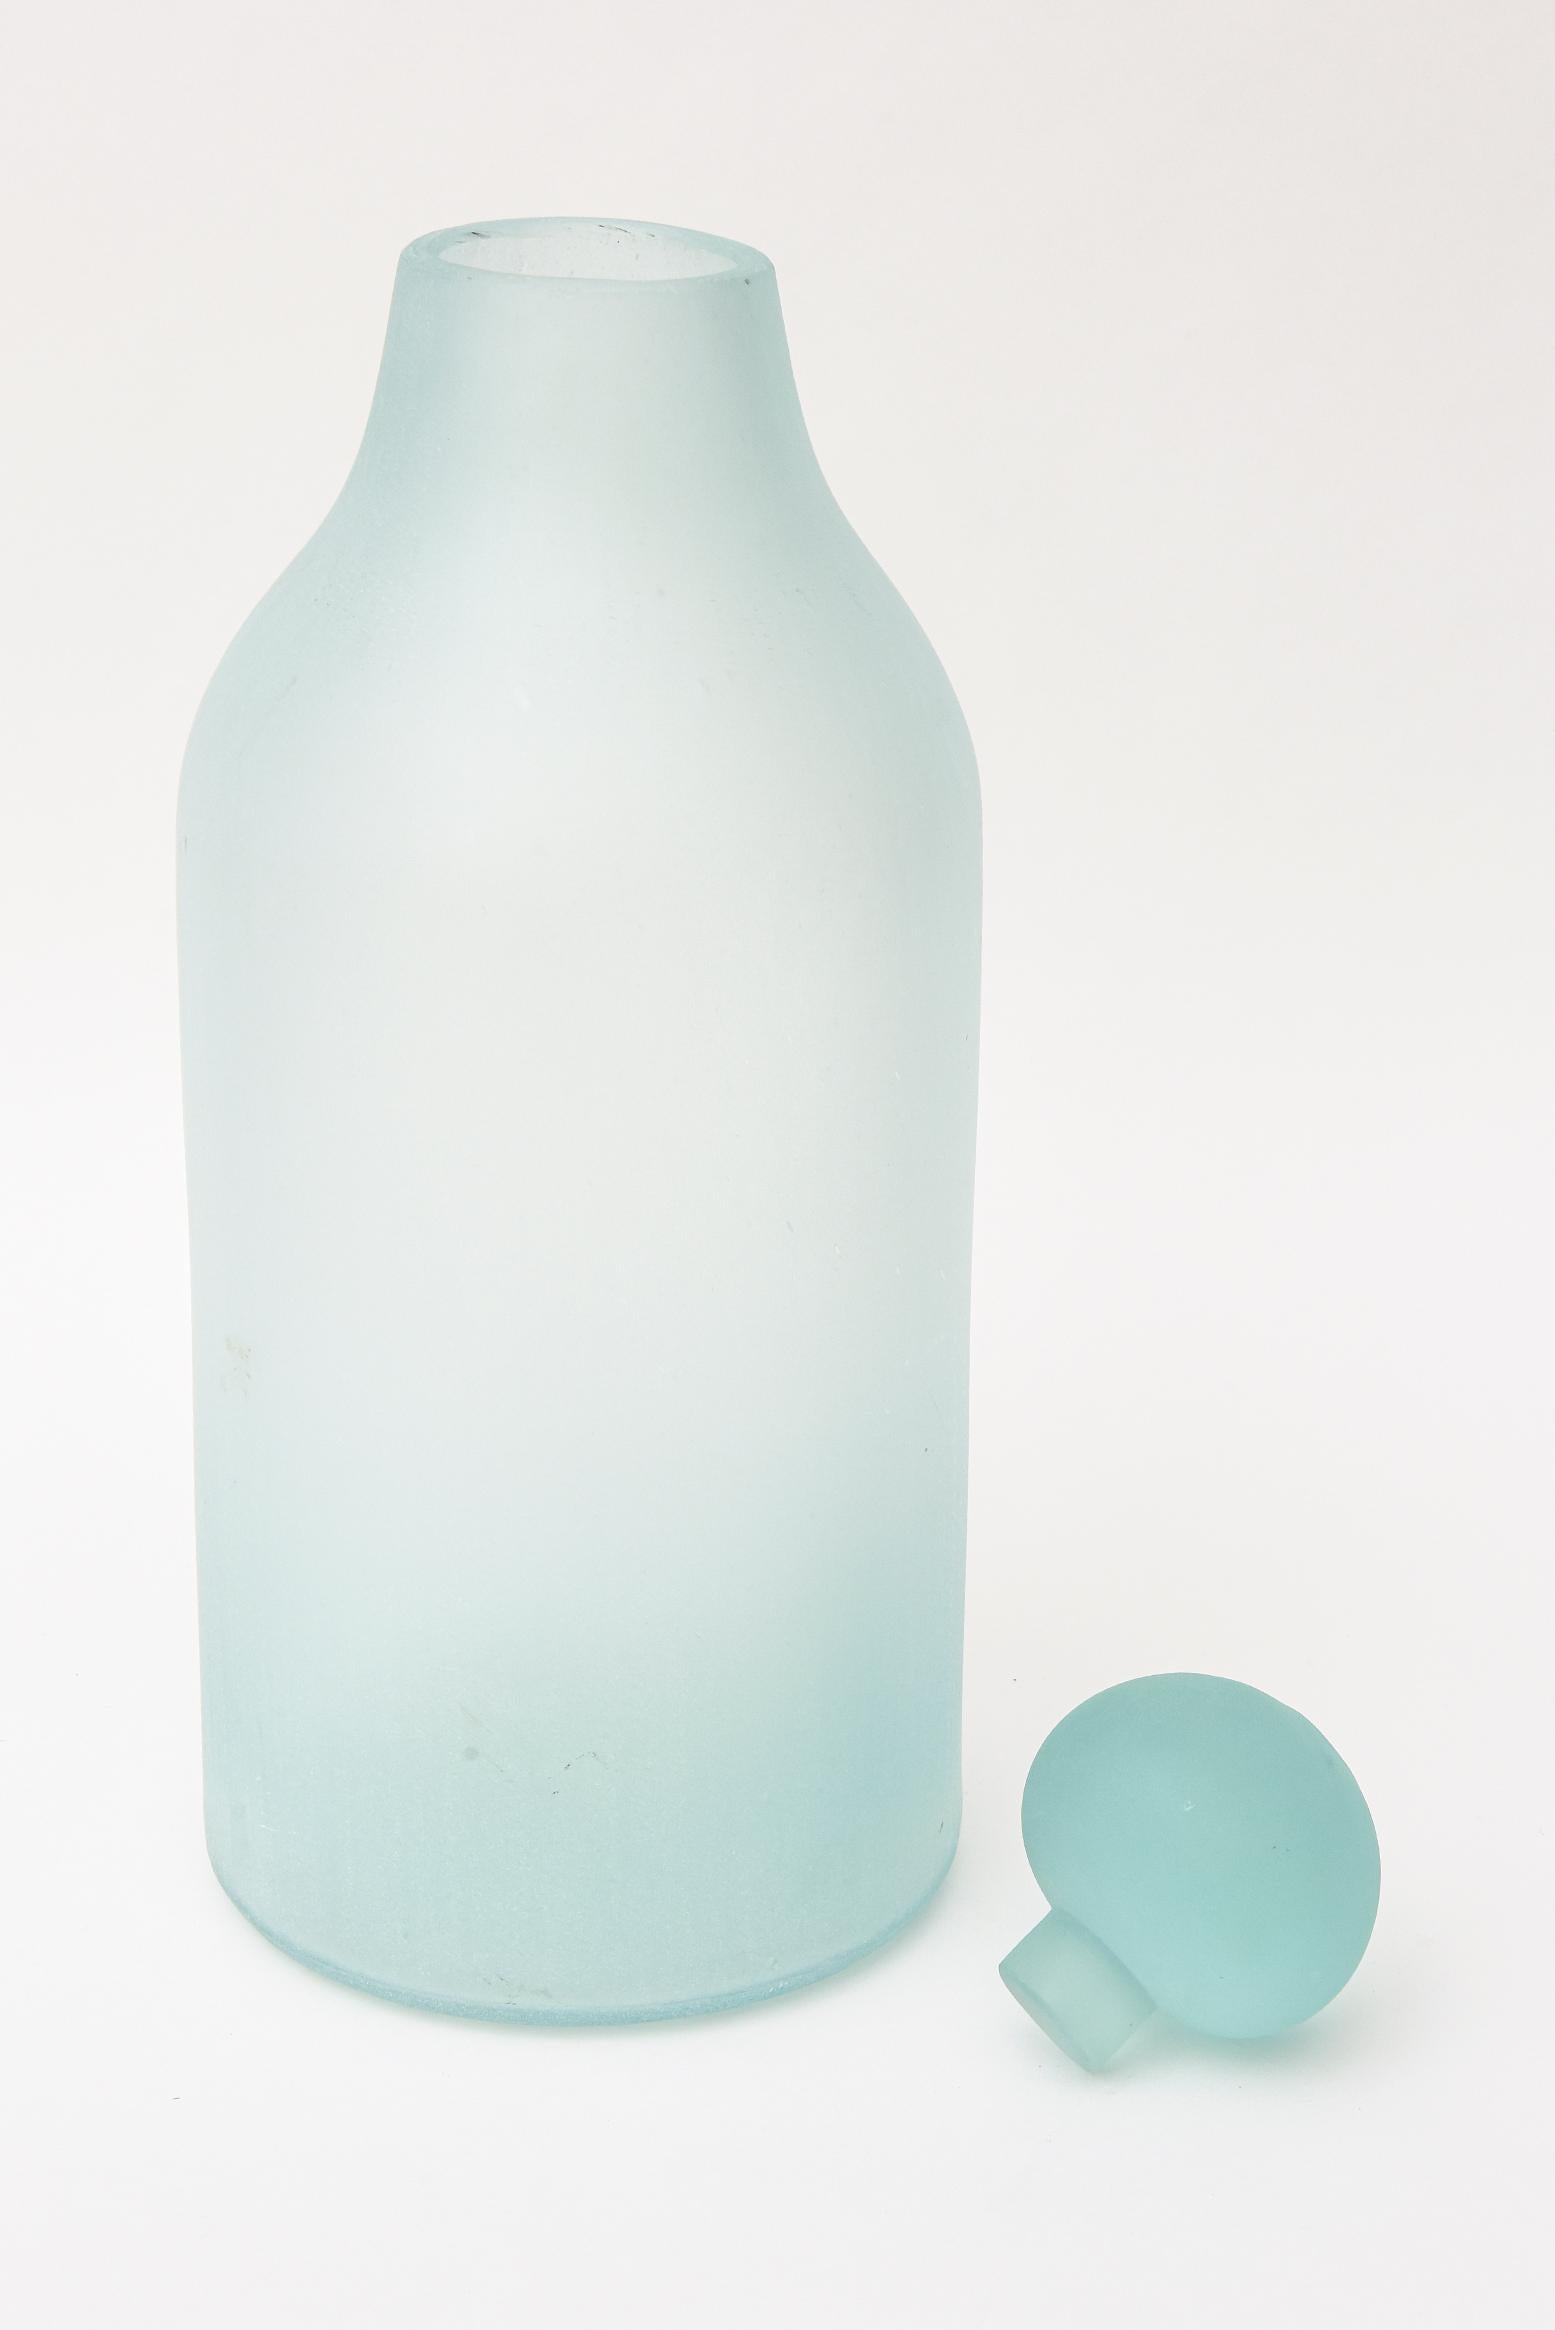 Italian Murano Scavo Turquoise Decanter Bottle with Ball Stopper Attributed Cenedese